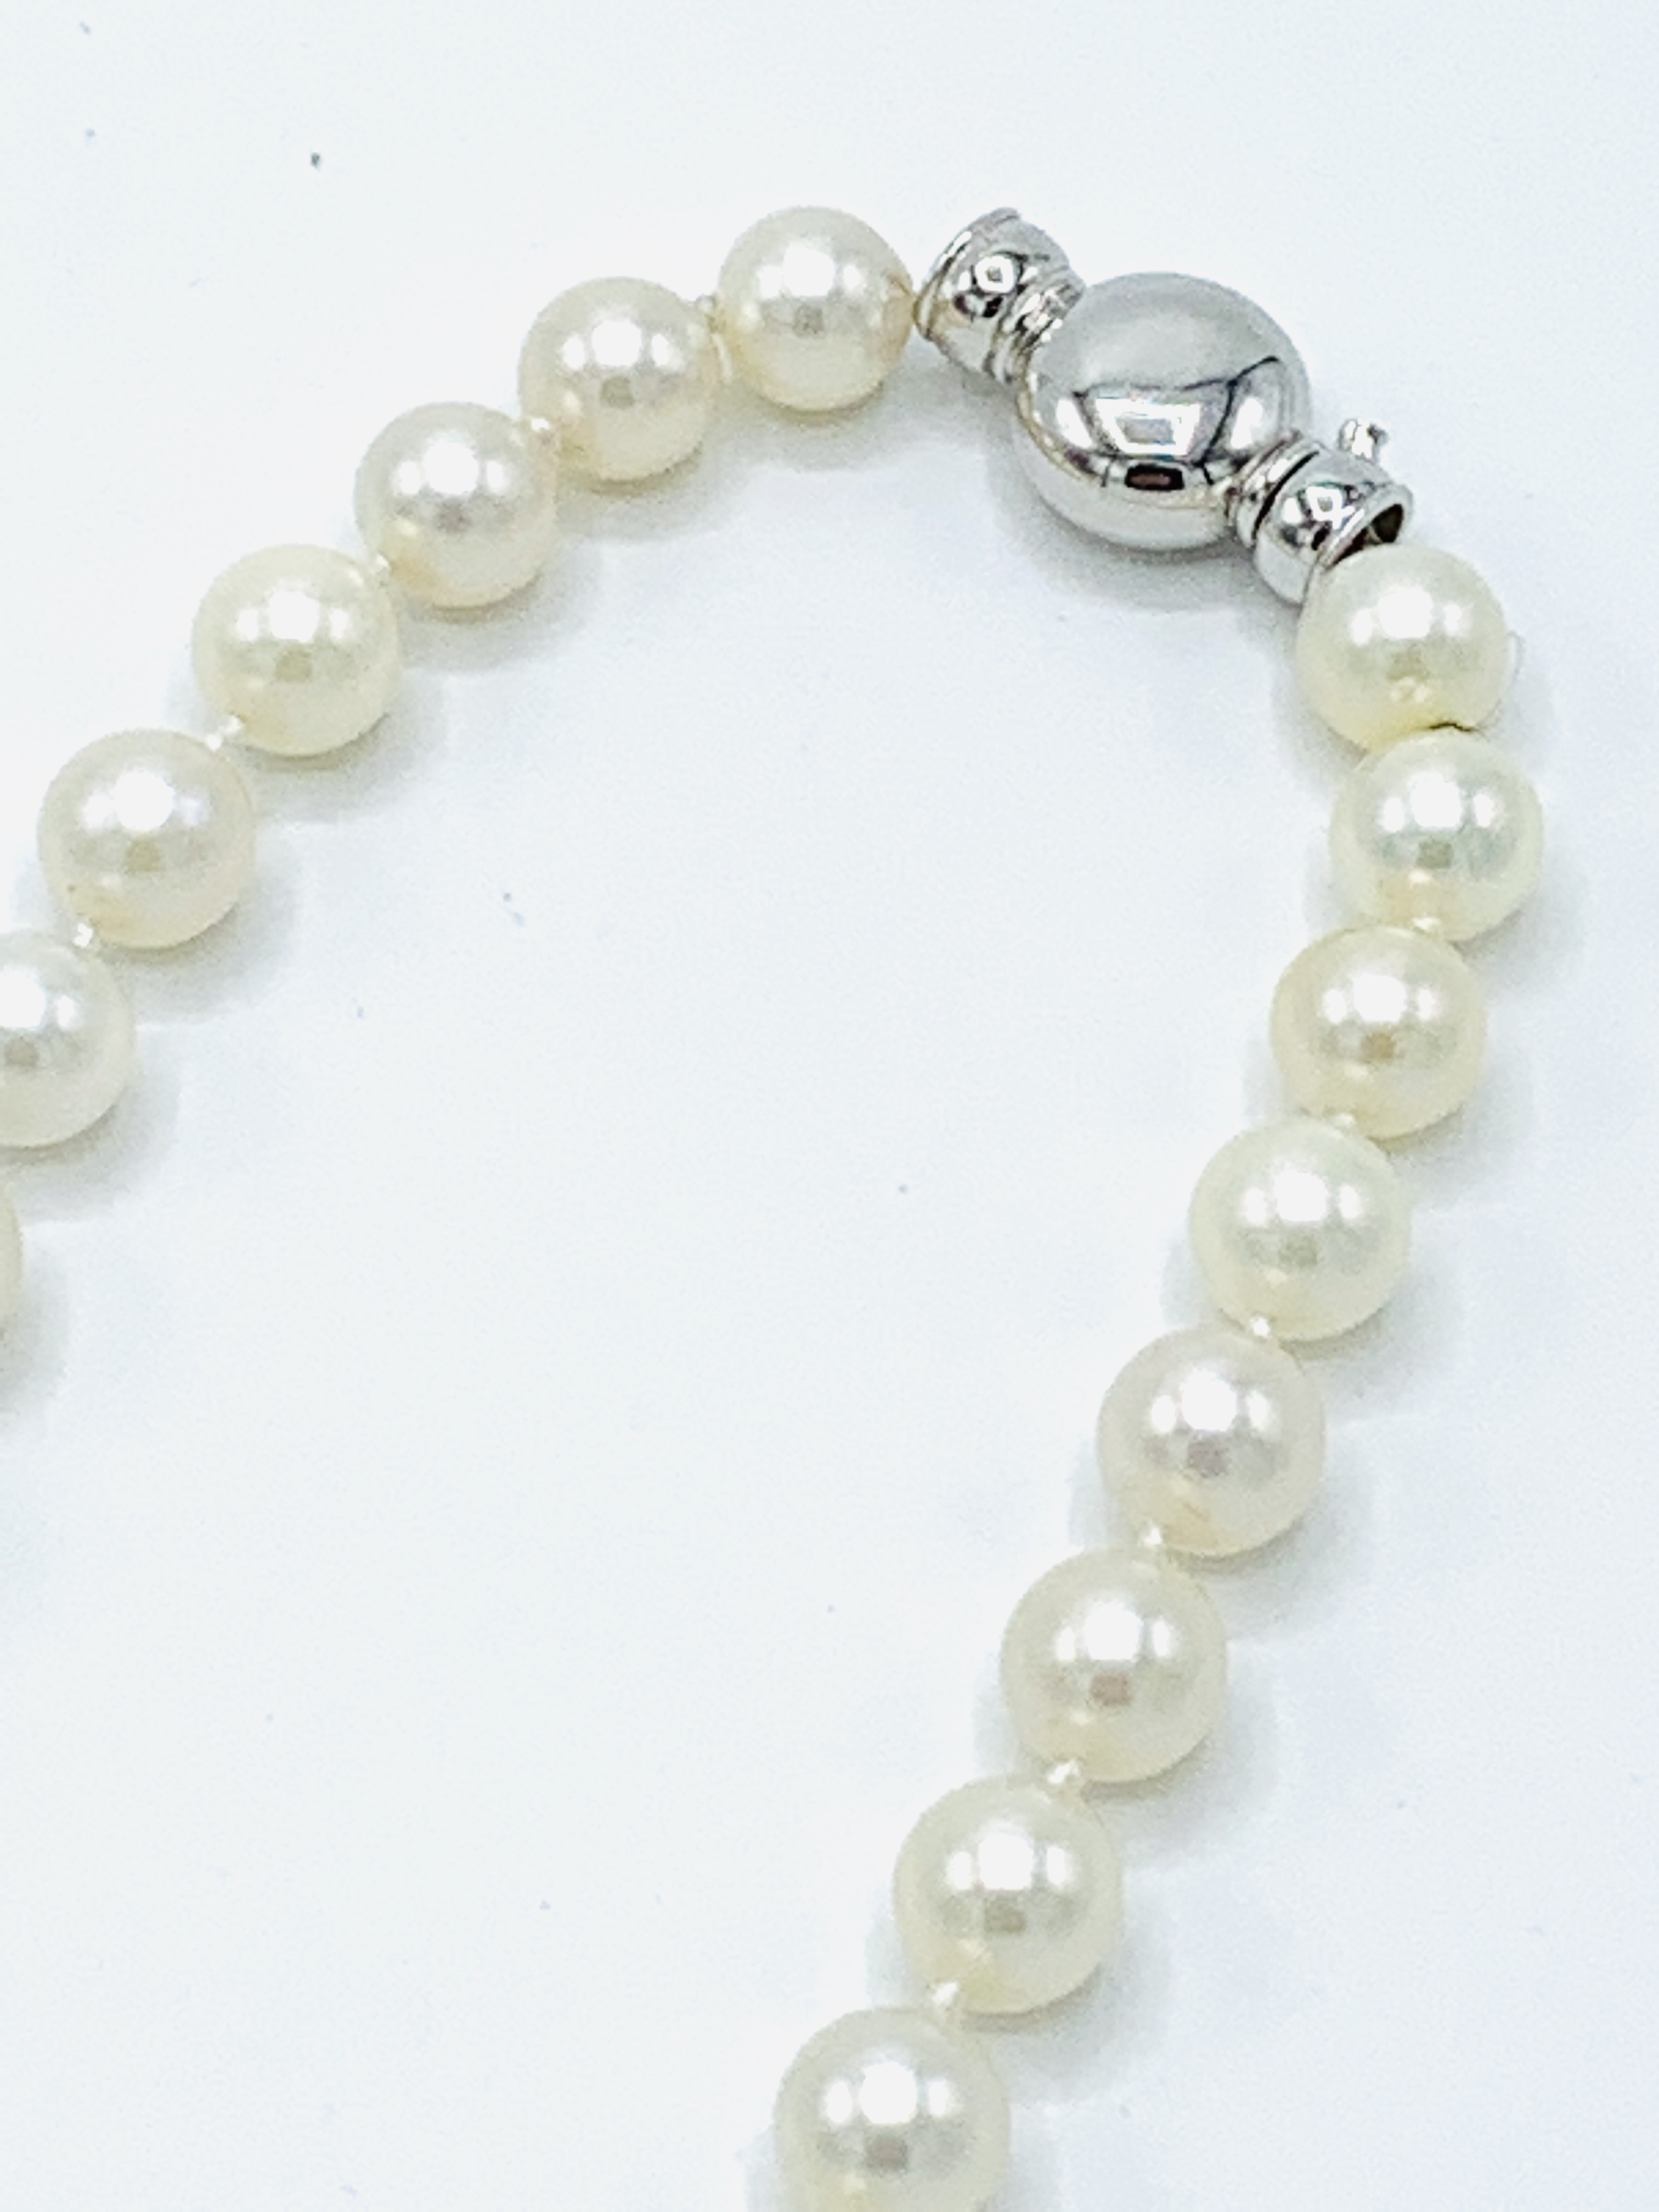 Cultured pearl necklace. - Image 2 of 4